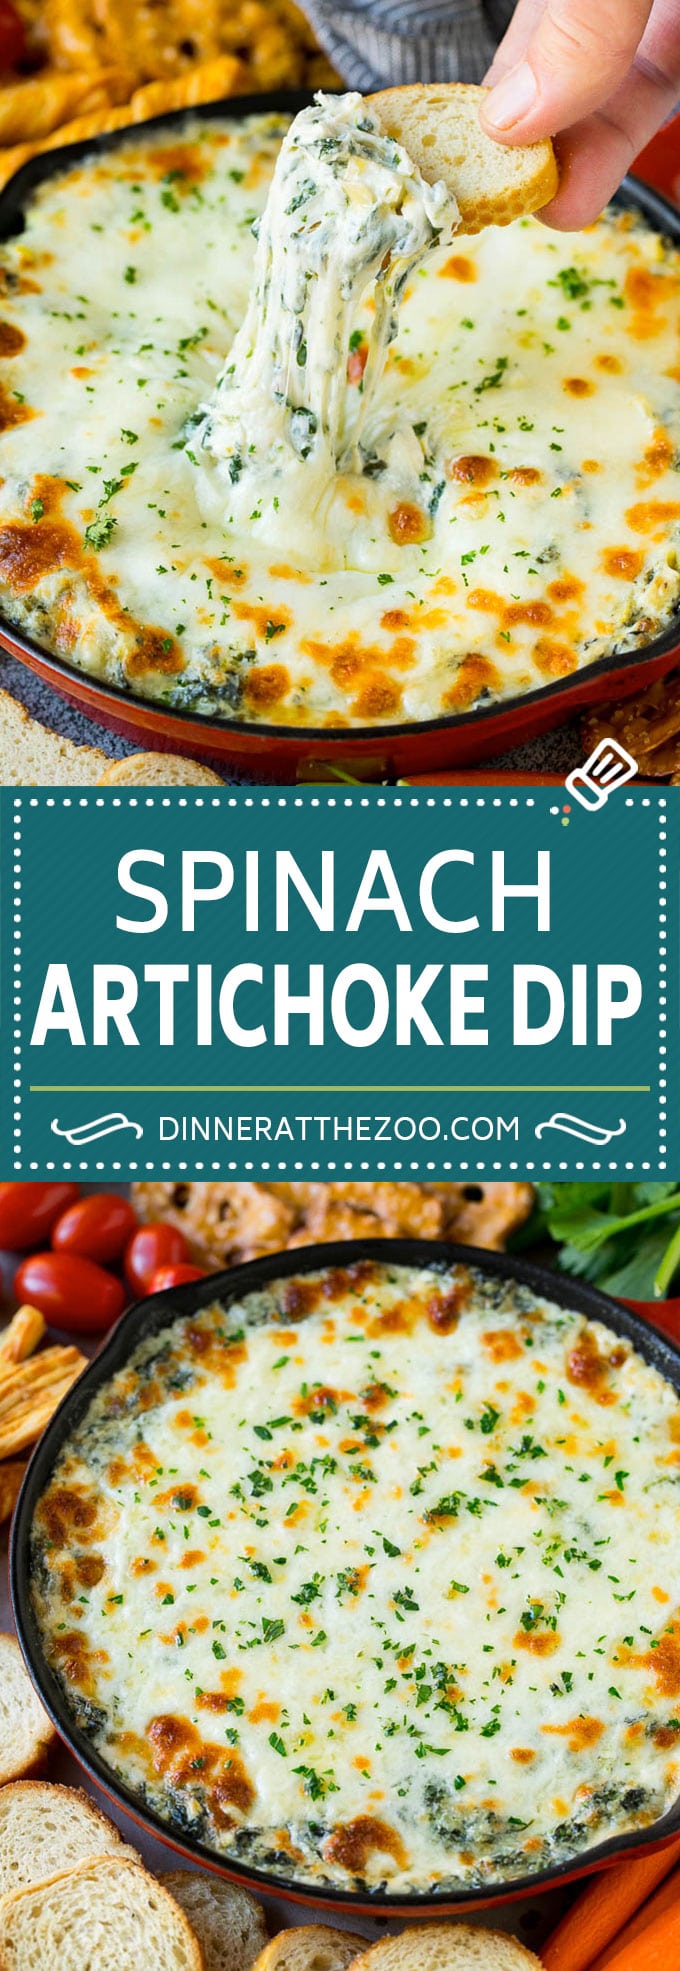 Spinach artichoke dip is a classic appetizer that's easy to make and gets rave reviews! #dip #dinneratthezoo